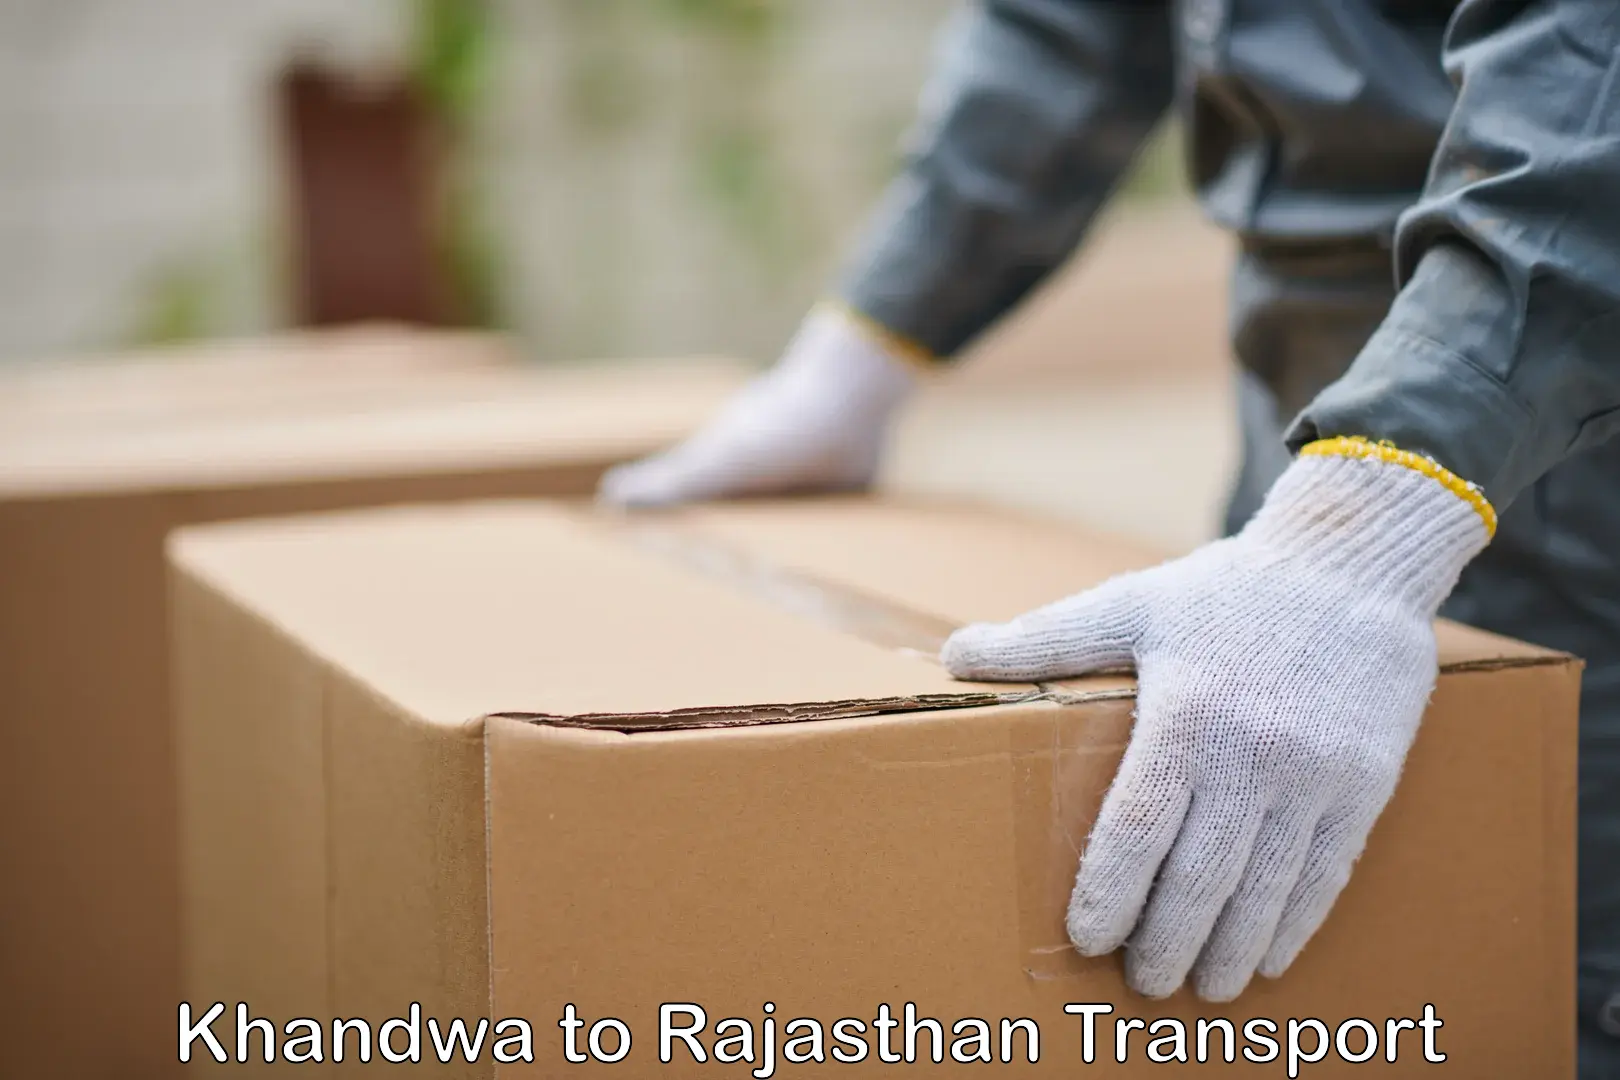 Daily parcel service transport Khandwa to Abu Road